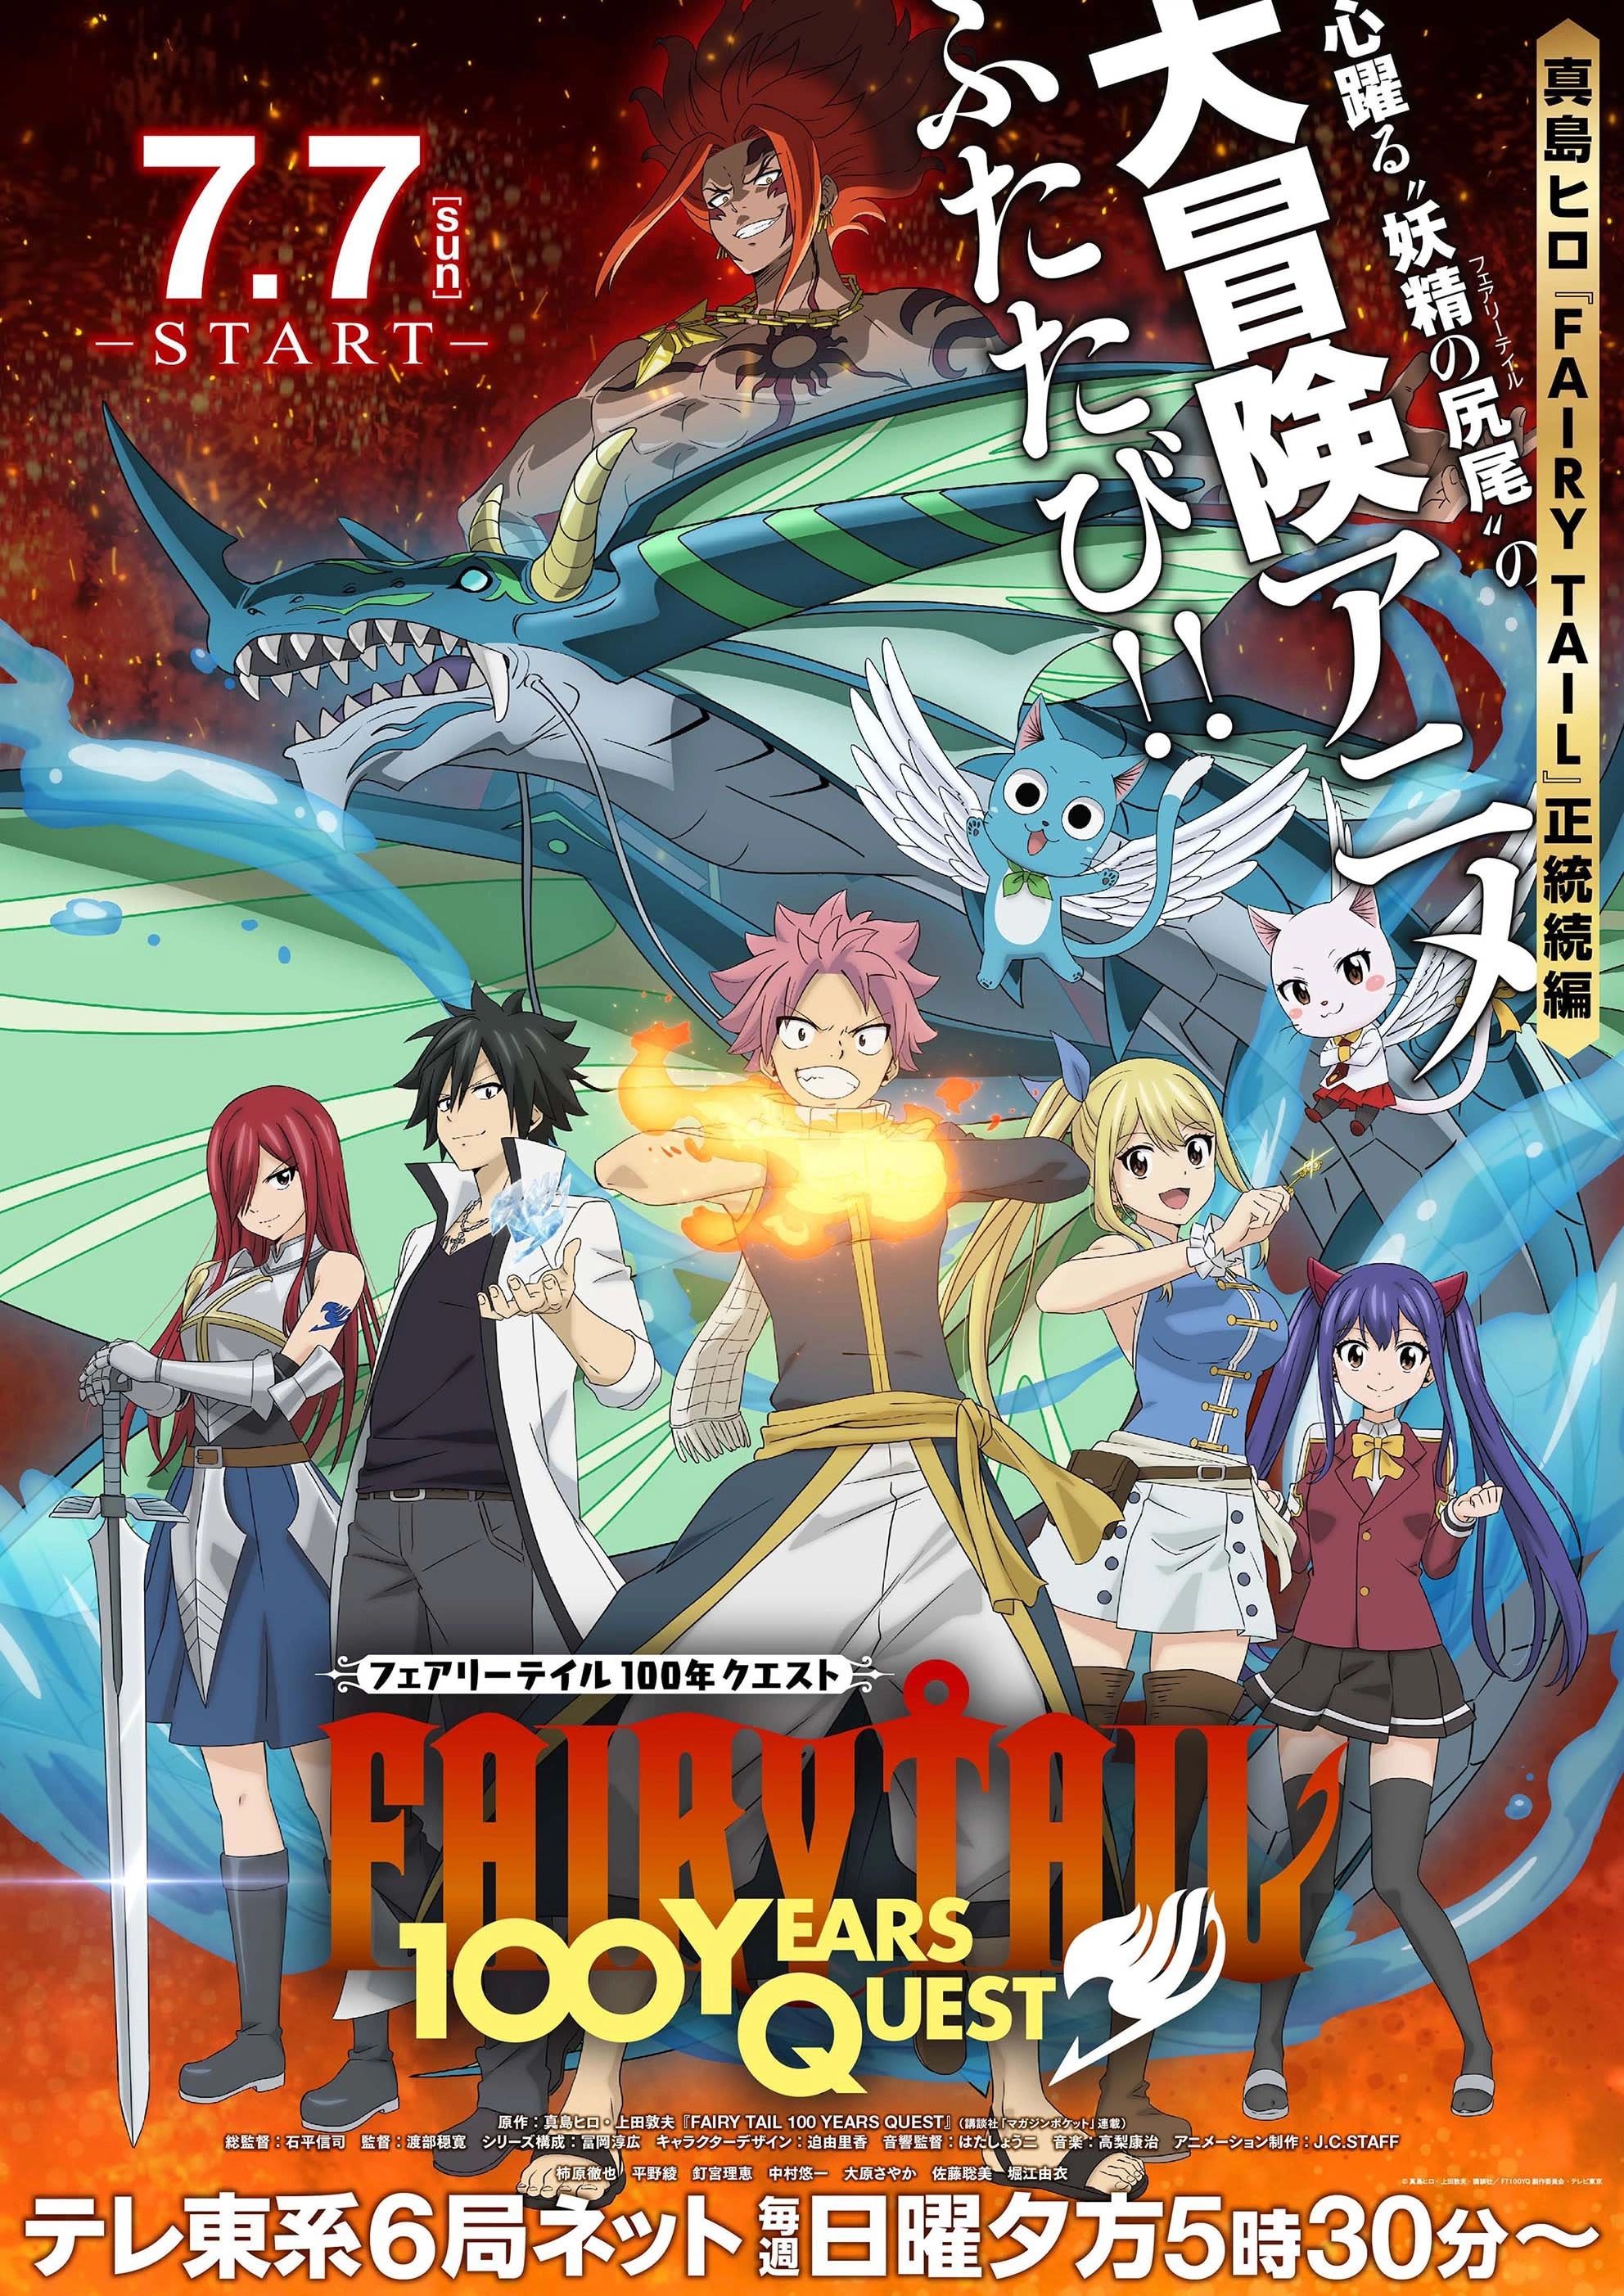 Everything You Need To Know About Fairy Tail's Anime Sequel